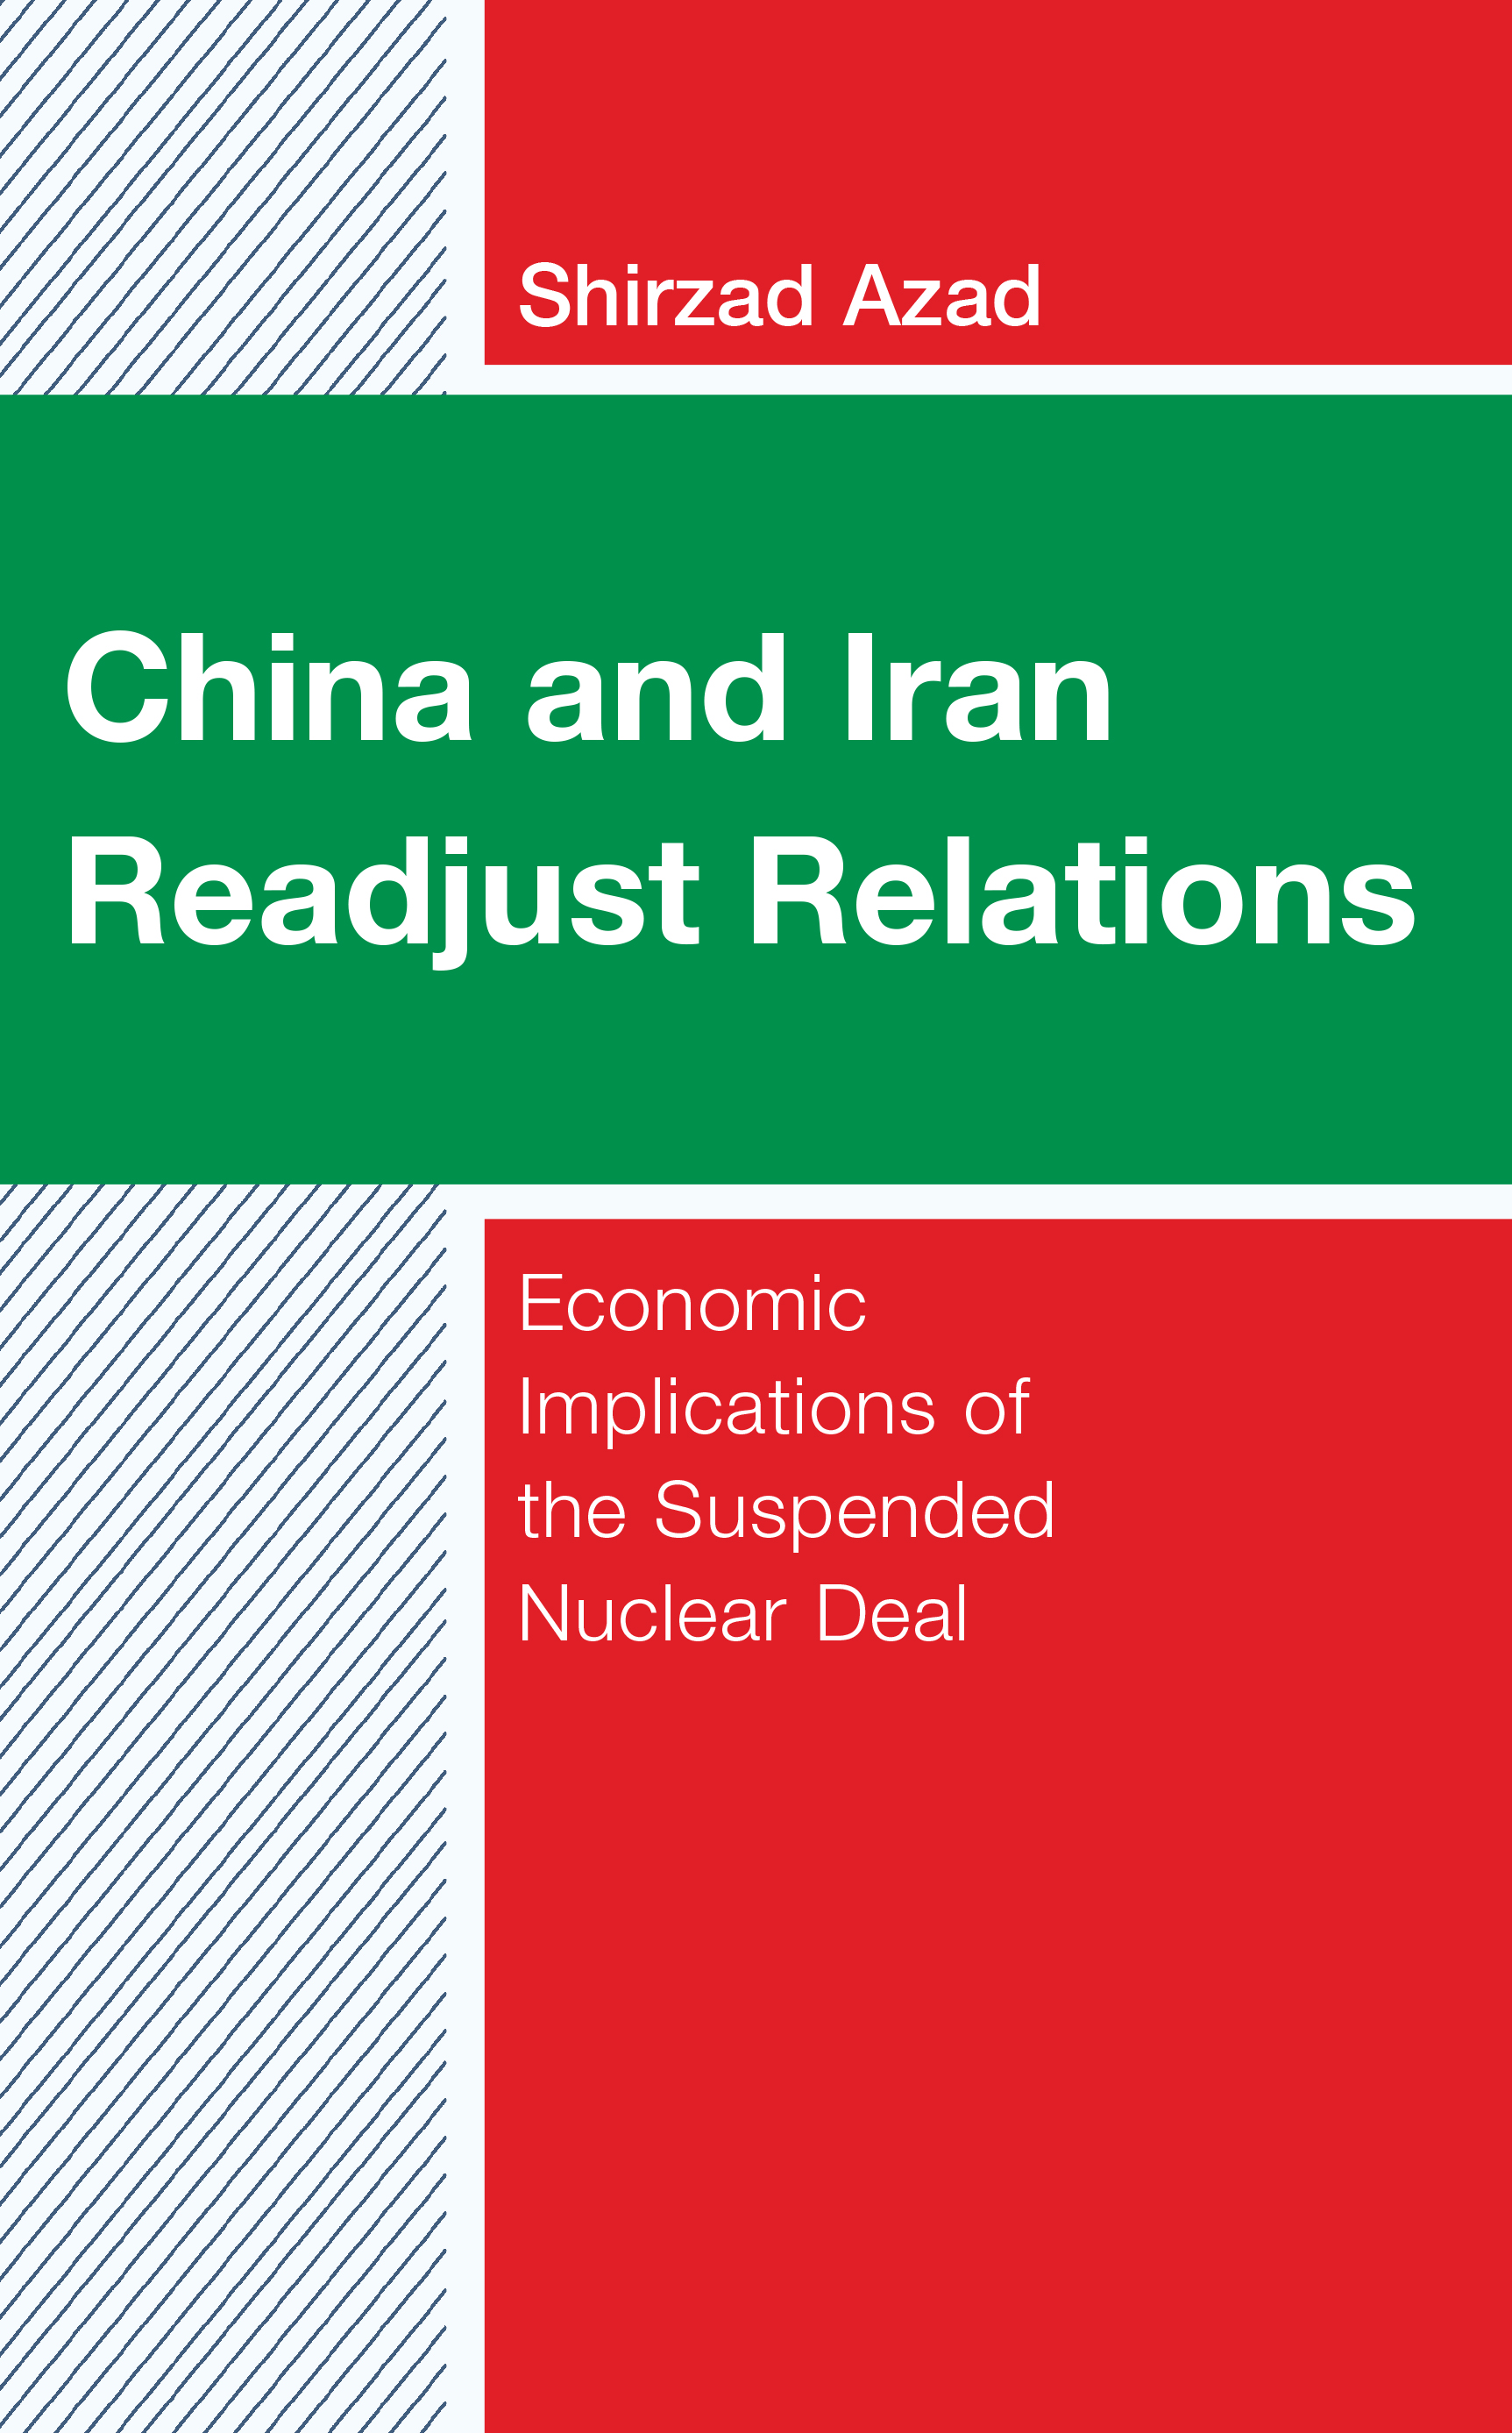 China and Iran Readjust Relations: Economic Implications of the Suspended Nuclear Deal